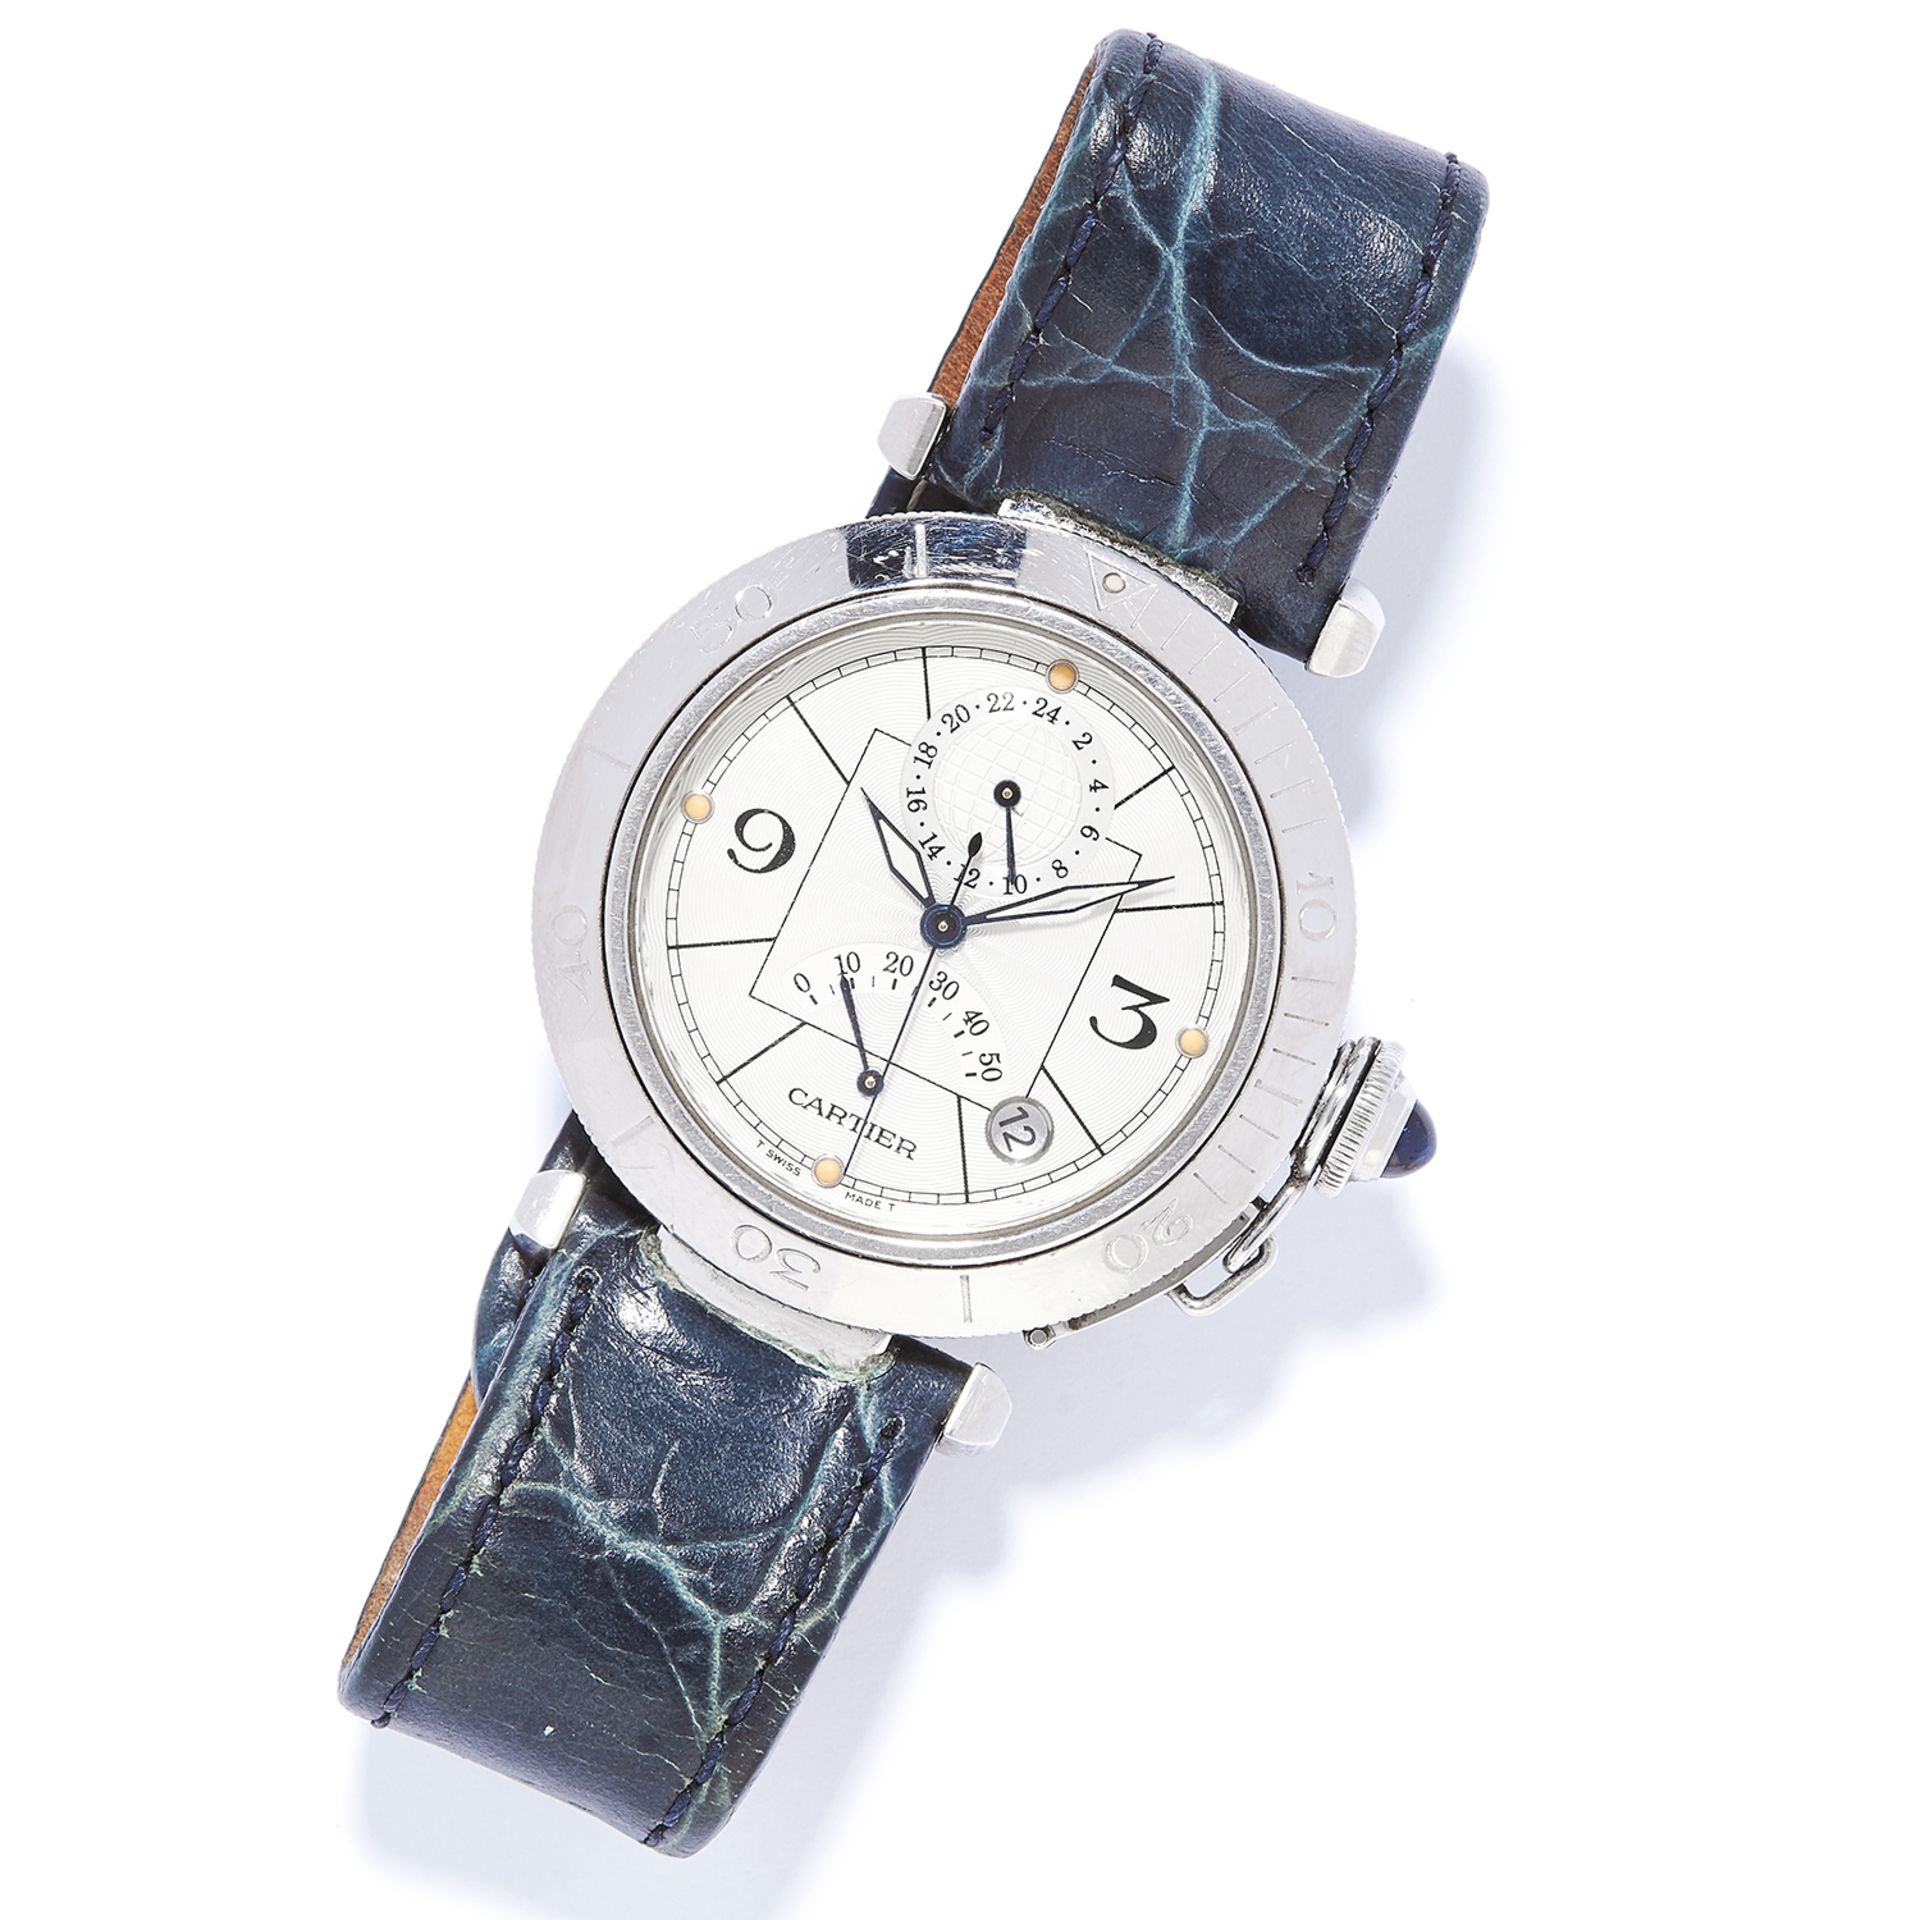 'PASHA DE CARTIER' MENS WATCH, CARTIER in steel, with white dial, on blue leather strap, signed